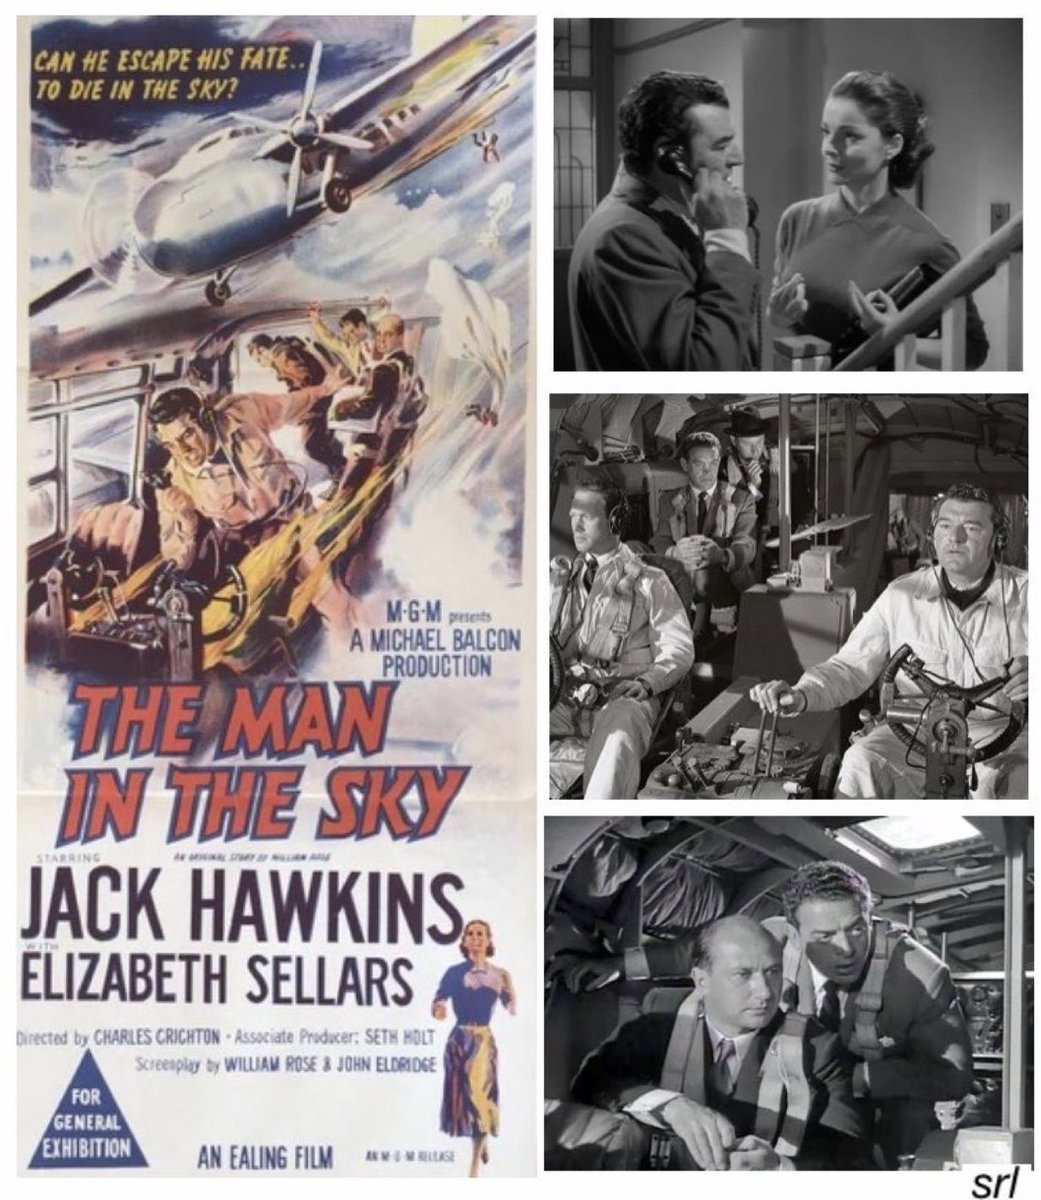 12:45pm TODAY on @TalkingPicsTV 

The 1957 #Drama film🎥 “The Man in the Sky” (aka “Decision Against Time”) directed by #CharlesCrichton  from a screenplay by #JohnEldridge & #WilliamRose (who wrote the story)

🌟#JackHawkins #ElizabethSellar #WalterFitzgerald #LionelJeffries